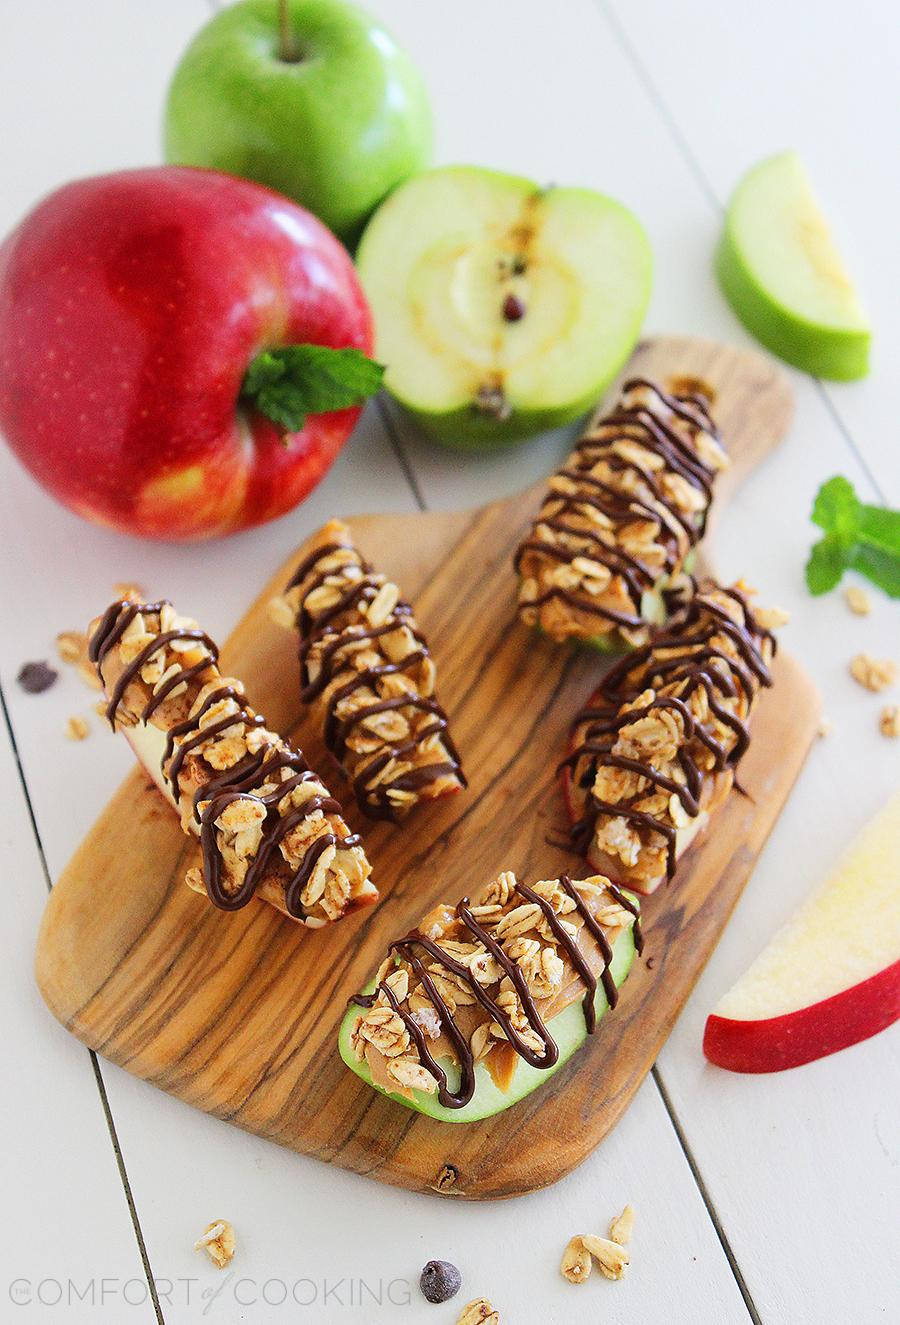 Healthy Snacks With Peanut Butter
 Chocolate Peanut Butter Granola Apple Bites Recipes for